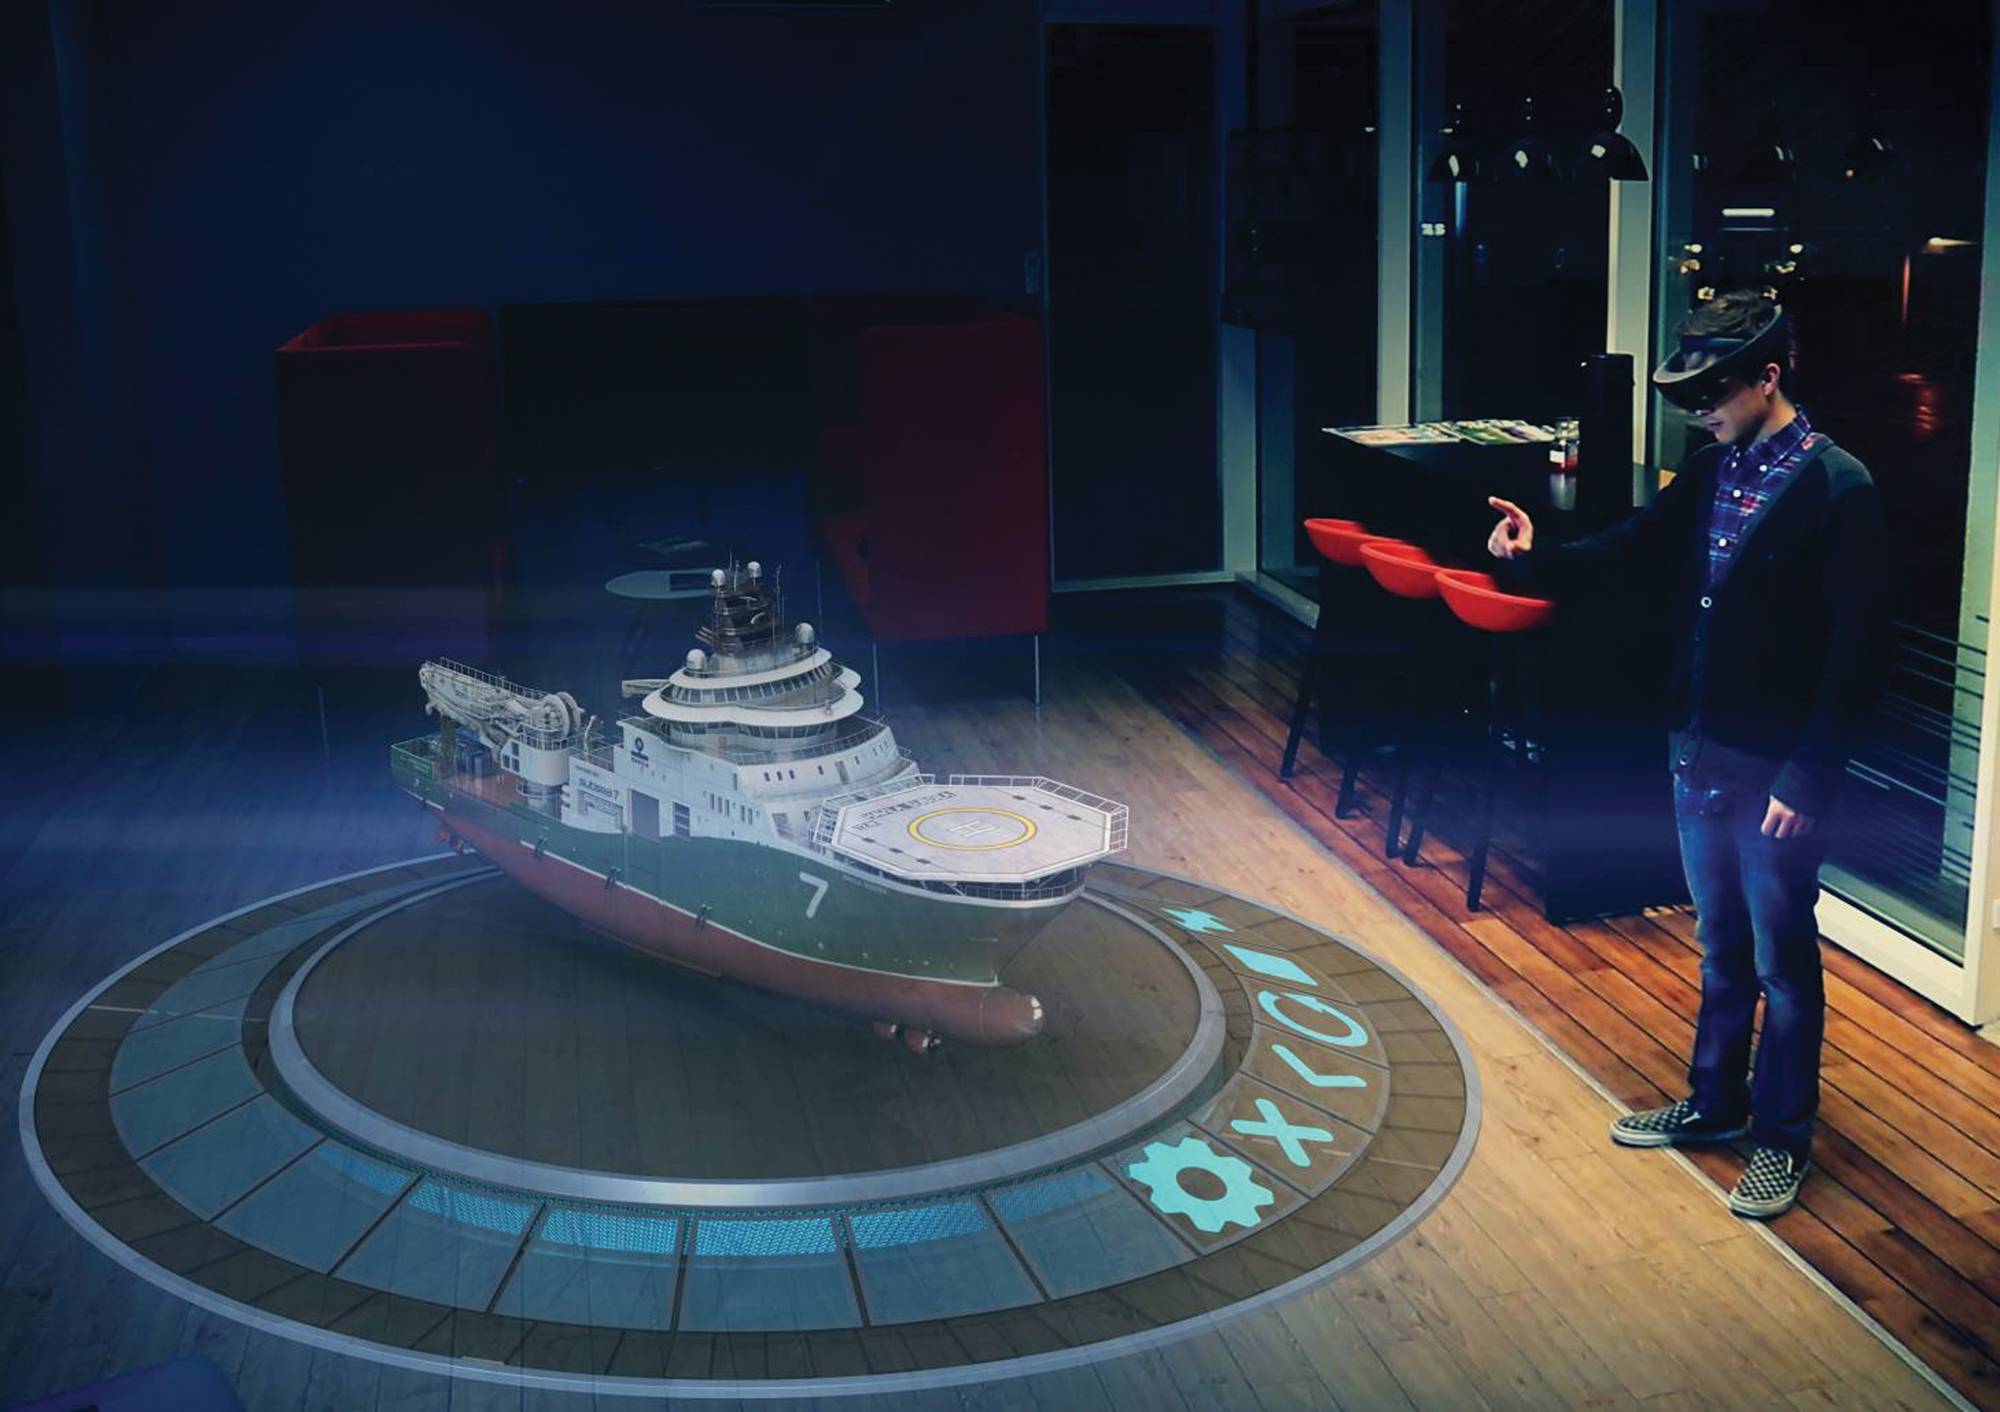 Where Does HoloLens Ship From